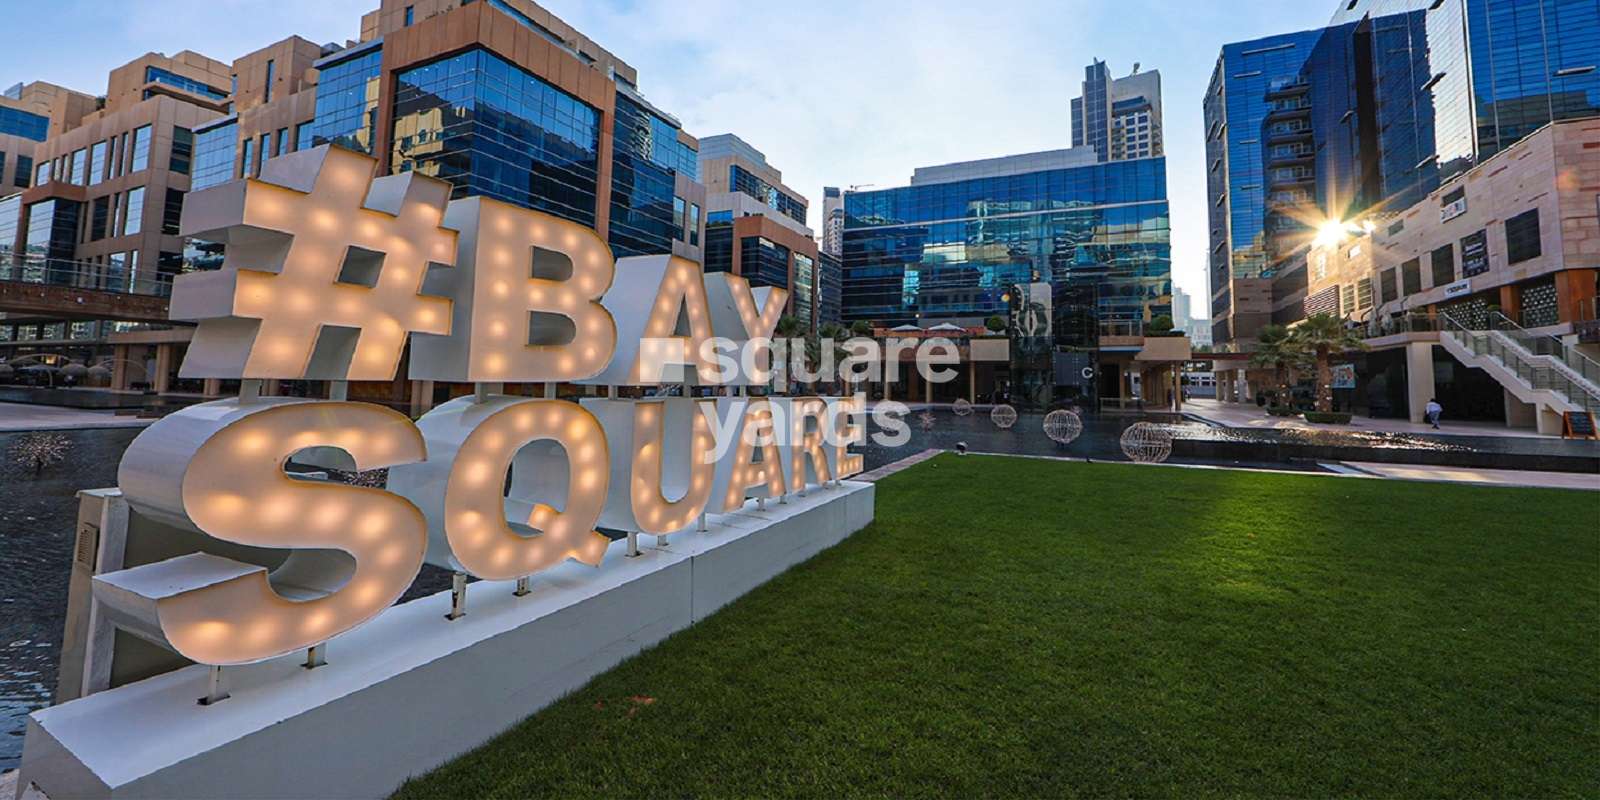 Bay Square Cover Image